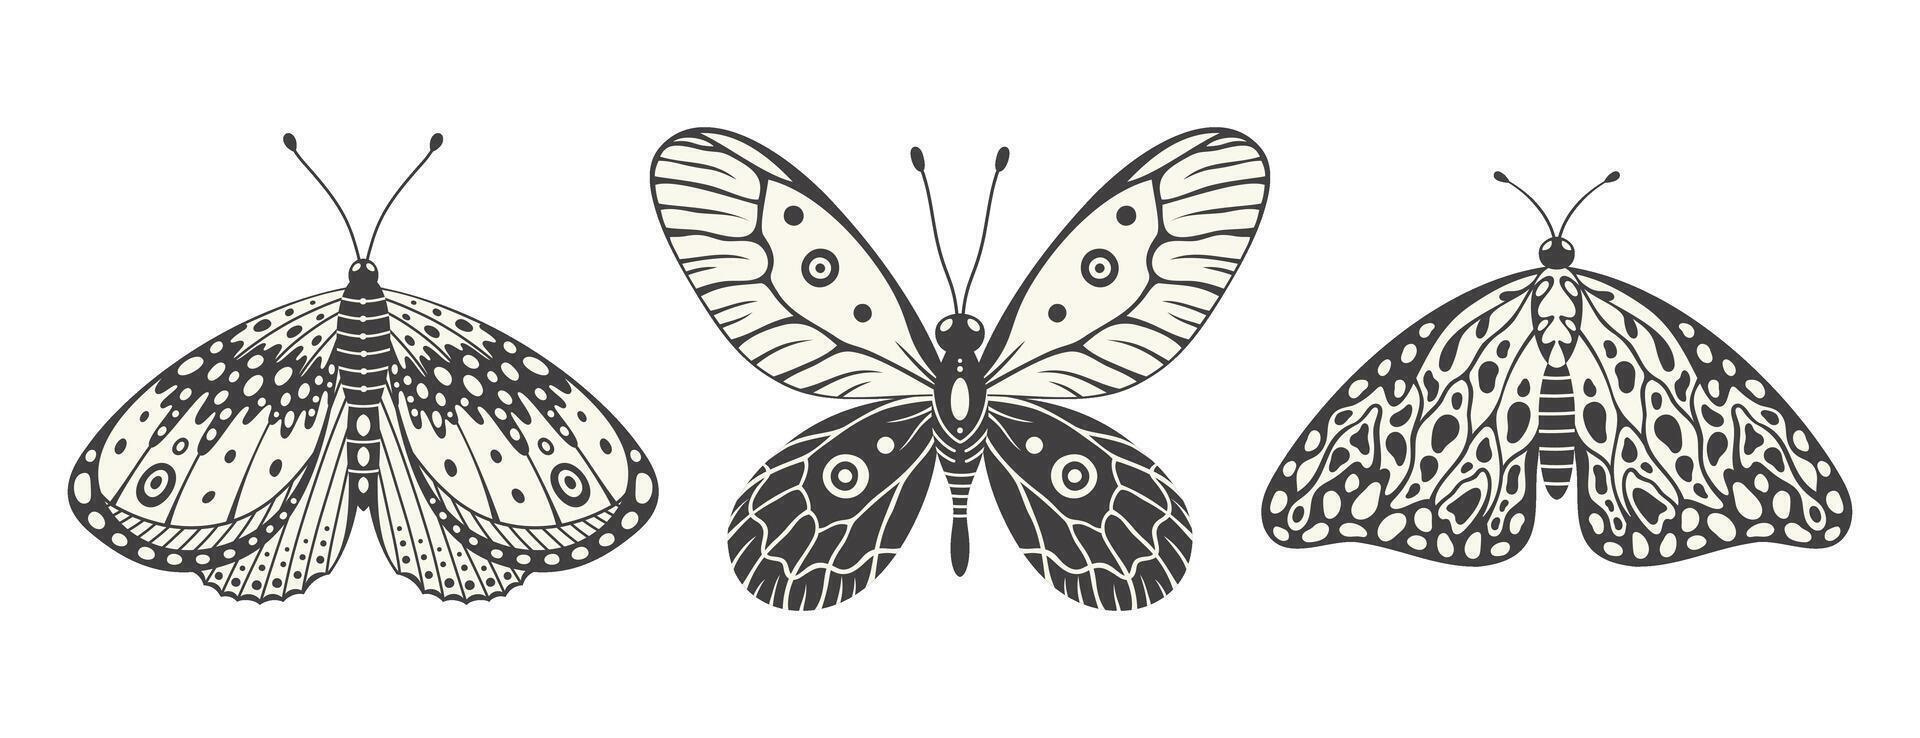 Butterfly and moth set, vector. Y2k style aesthetic, wing shapes in front view, magic symbols collection, abstract illustration. Three black and white elements, tattoo graphic print vector